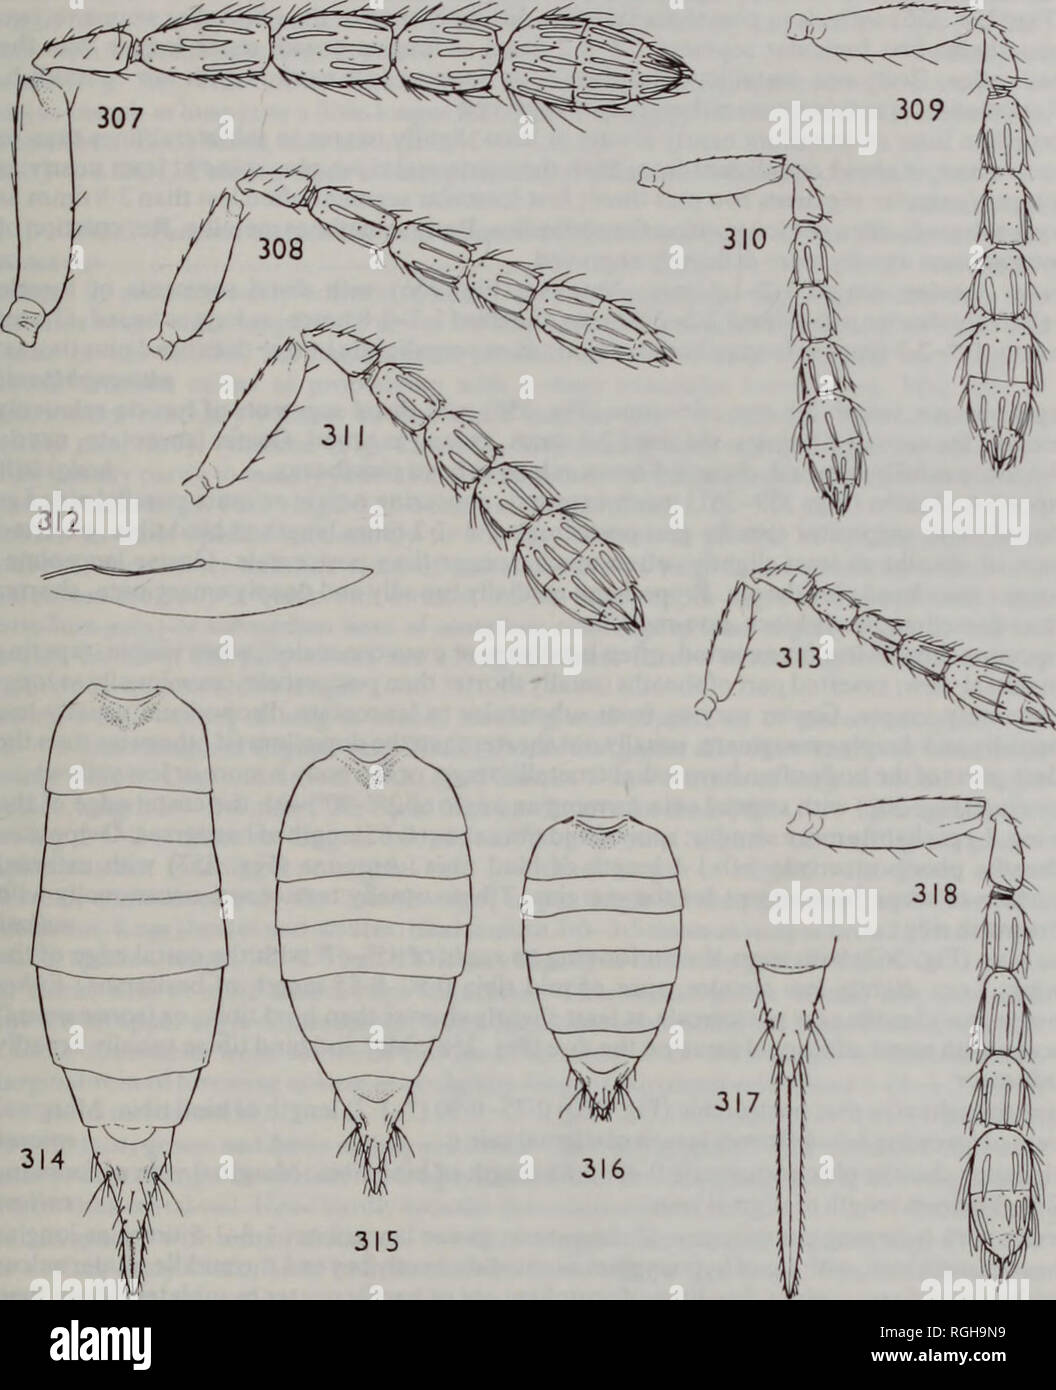 . Bulletin of the British Museum (Natural History) Entomology. THE EUROPEAN TETRASTICHINAE 161. Figs 307-318 307, Aprostocetus (Aprostocetus) westwoodii (Fonscolombe) $, antenna. 308, A. (A.) fonscolombei sp. n. $, antenna. 309, A. (A.) epicharmus (Walker) $, antenna. 310, 311, ,4. (A.)agrus (Walker) $: (310) forma typica, antenna; (311) forma com'/(Erdos), antenna. 312,313,A (A.)gnomus sp. n. $: (312) hindwing; (313) antenna. 314, A. (A.) epicharmus (Walker) 9, gaster. 315, 316, A (A) agrus (Walker) $,gaster: (315) forma com'/(Erdos); (316) forma typica. 317, A. (A.)productussp. n. 9, last te Stock Photo